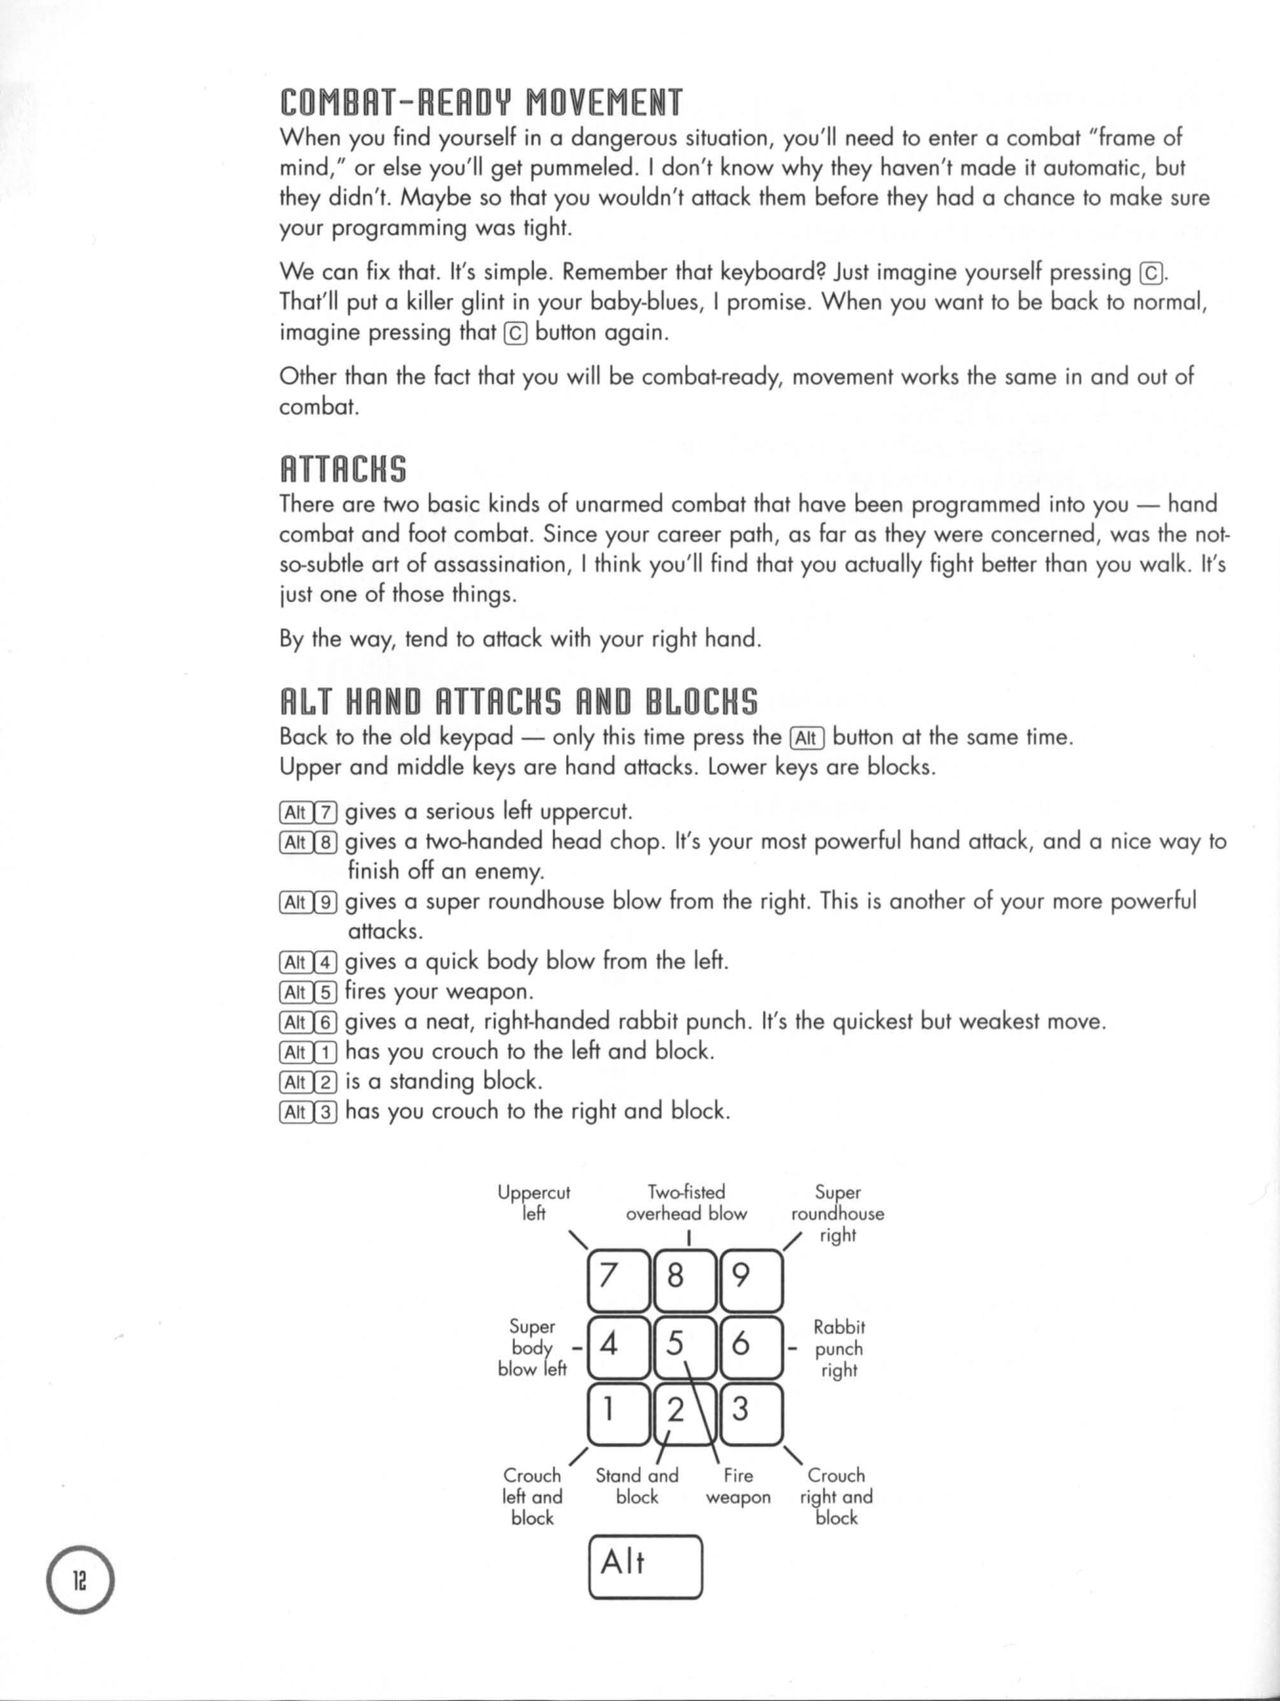 BioForge (PC (DOS/Windows)) Strategy Guide 12